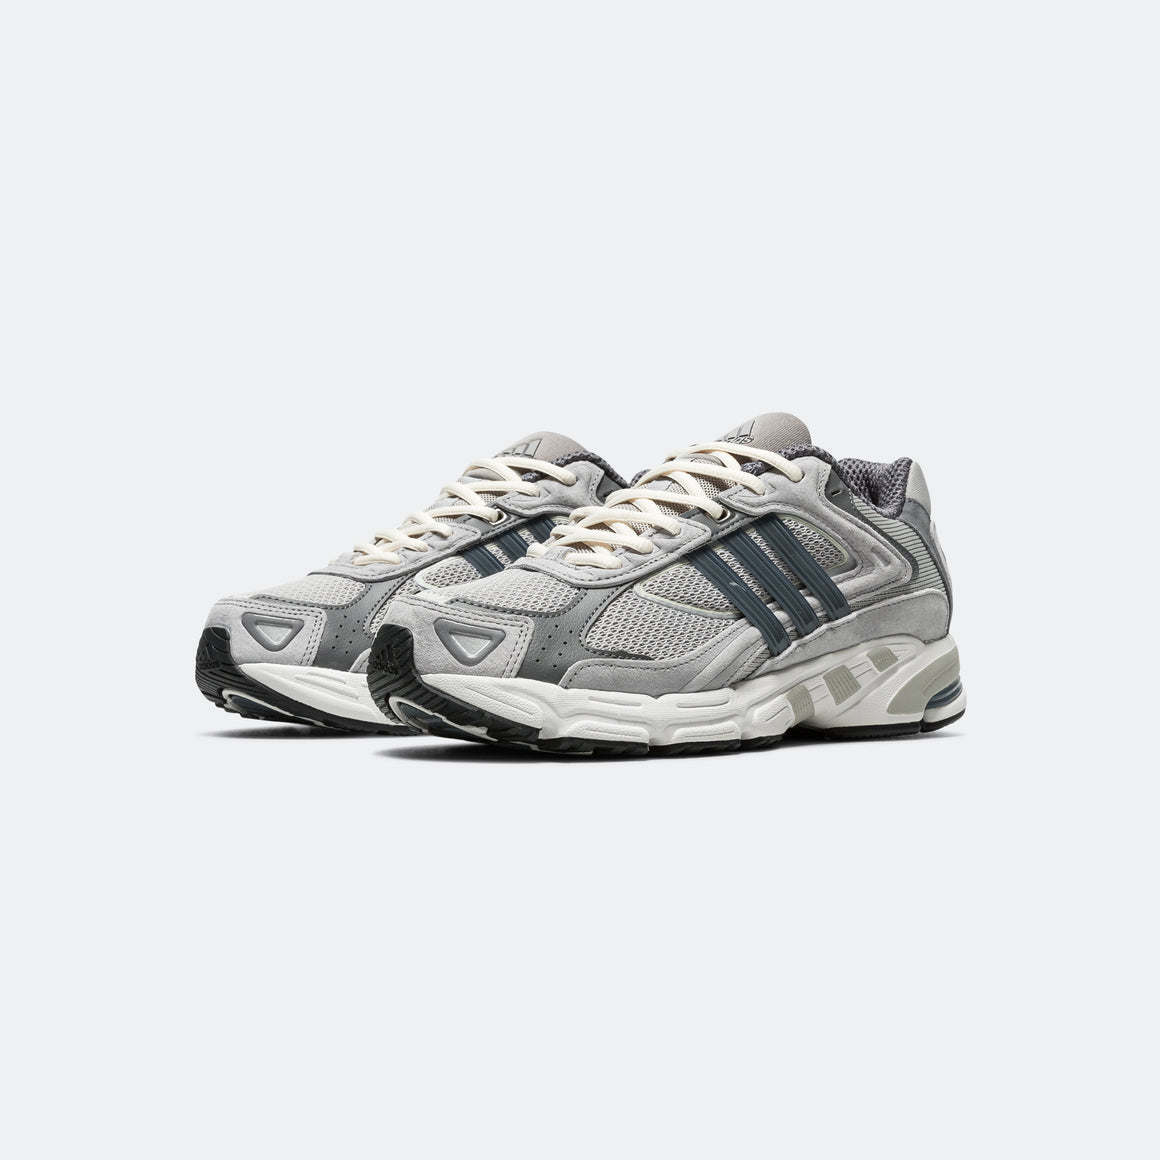 adidas - Response CL - Metal Grey/Grey Four-Crystal White - UP THERE